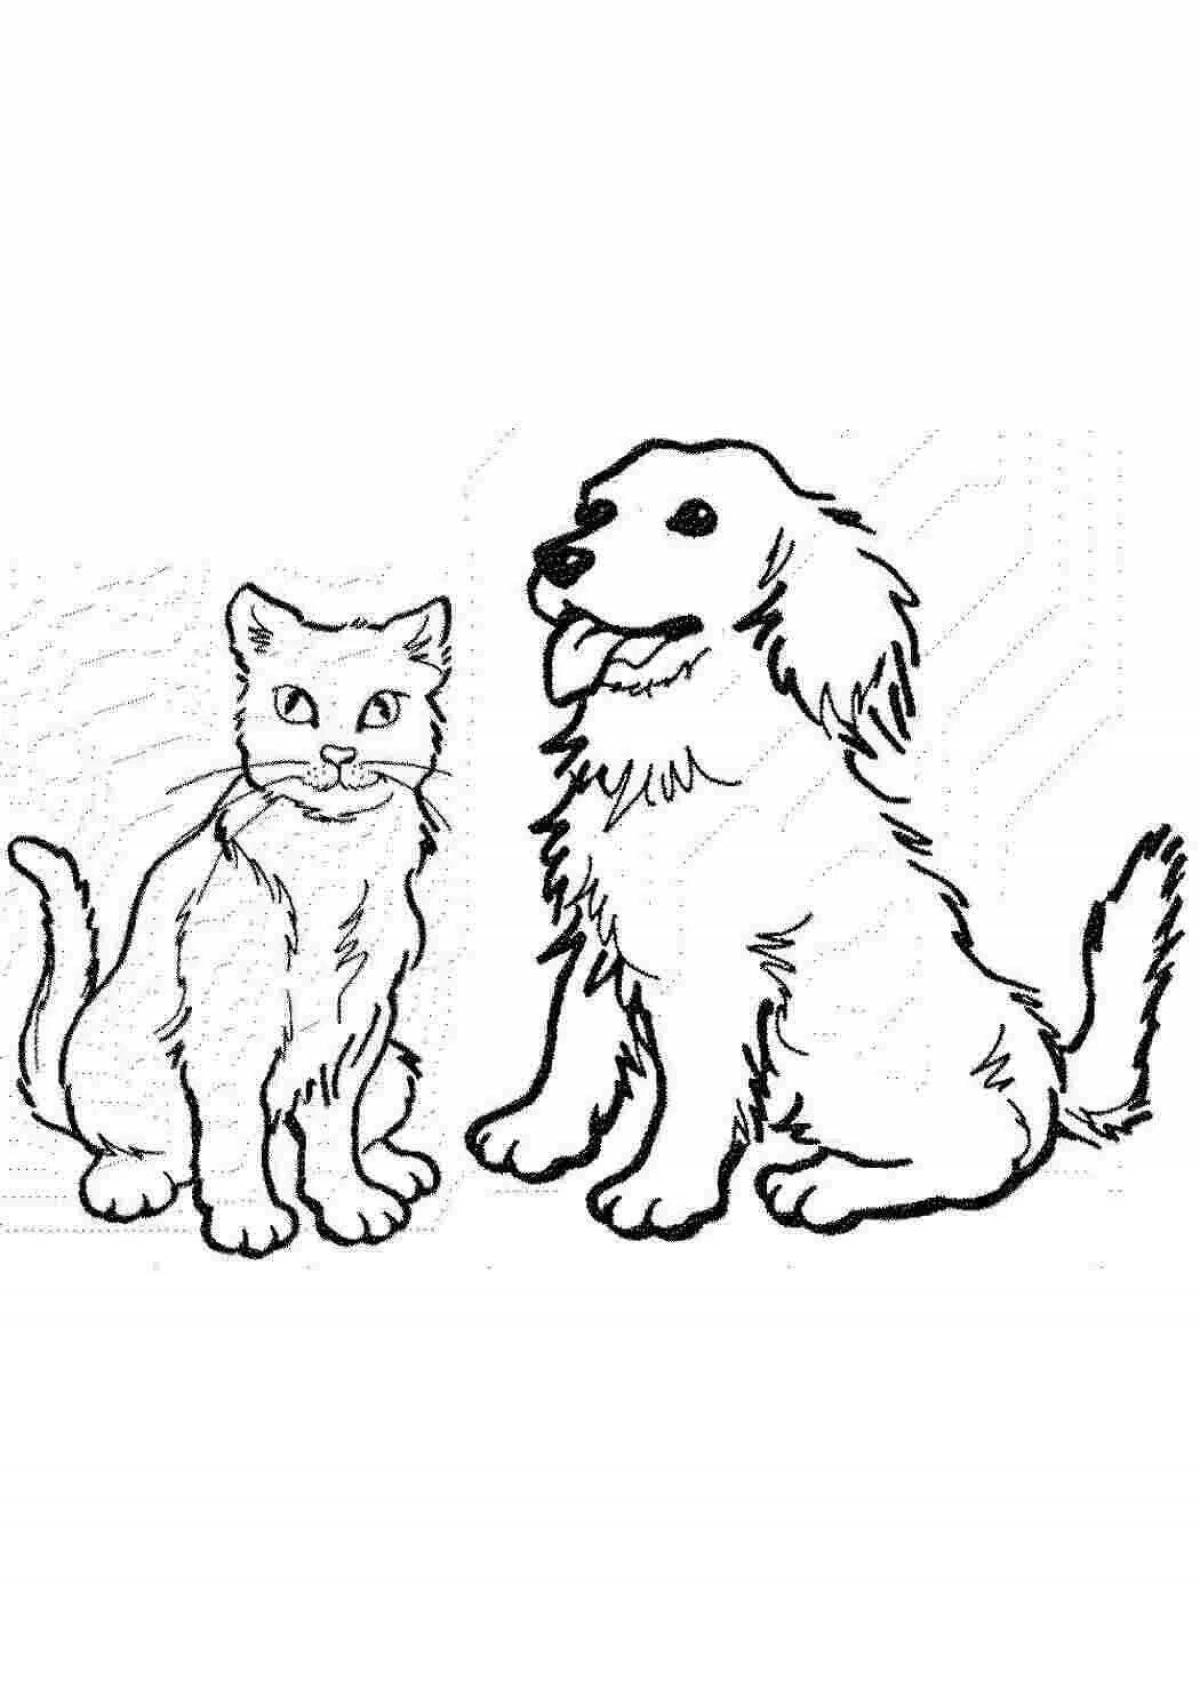 Cute cat and dog coloring together